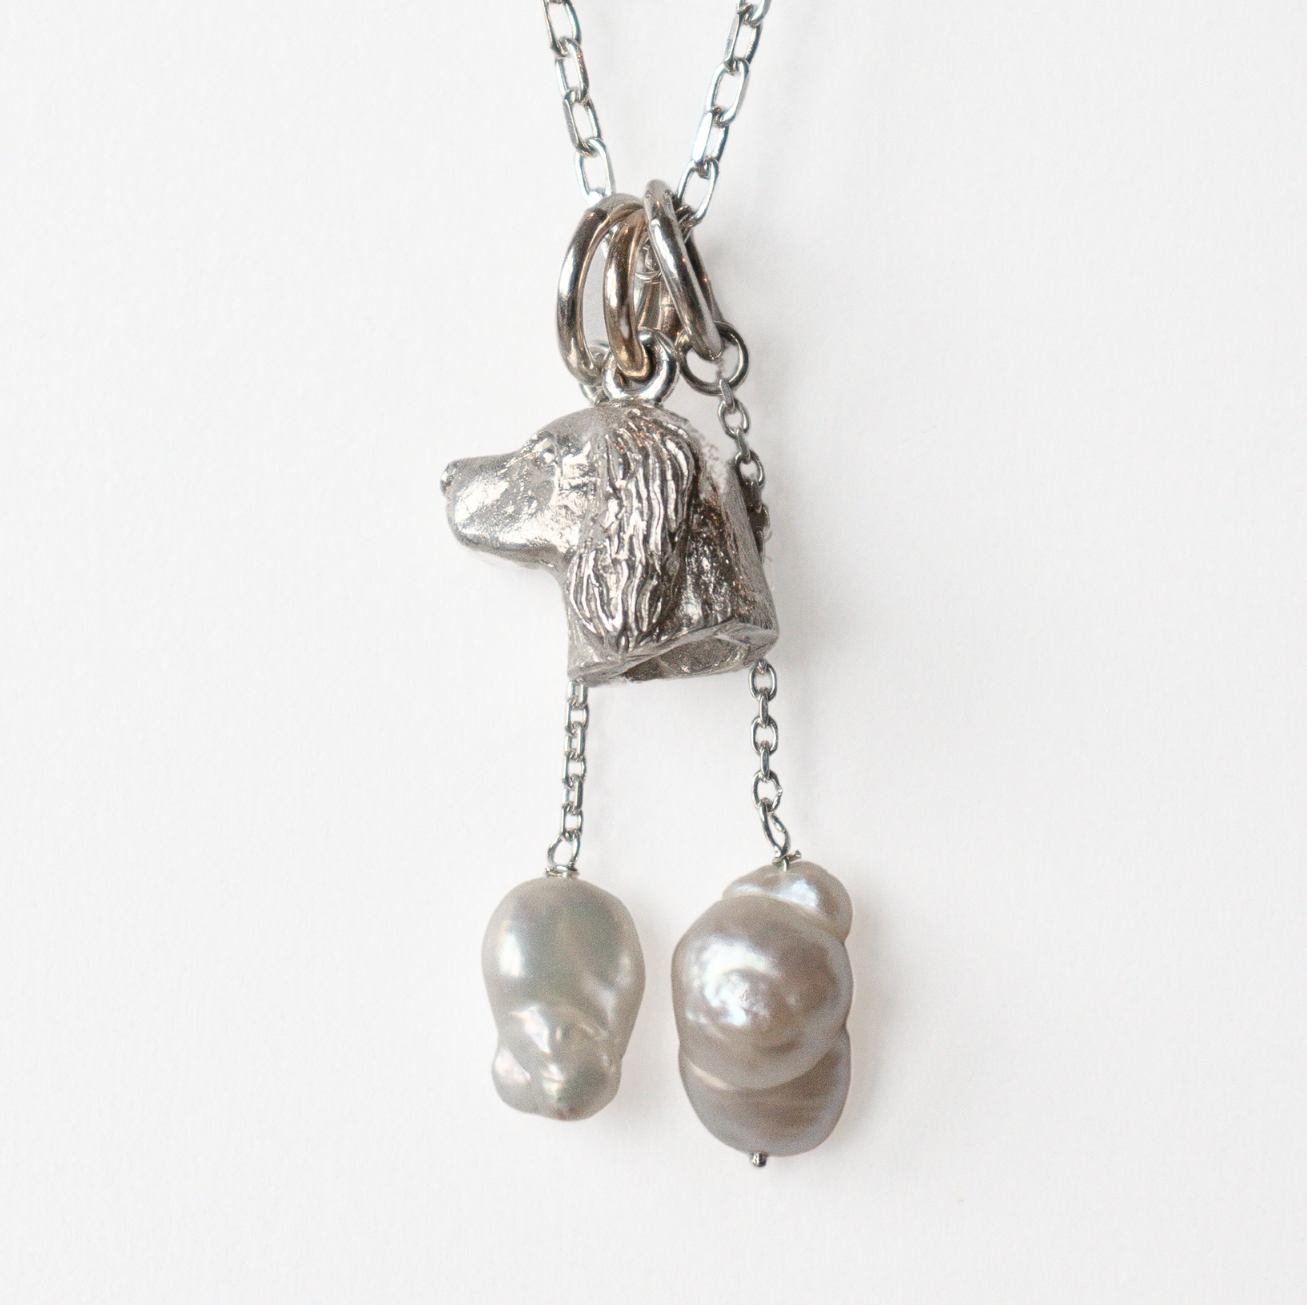 Spaniel Pendant with Freshwater Pearl Drops by Paul Eaton Sculptor/Silversmith